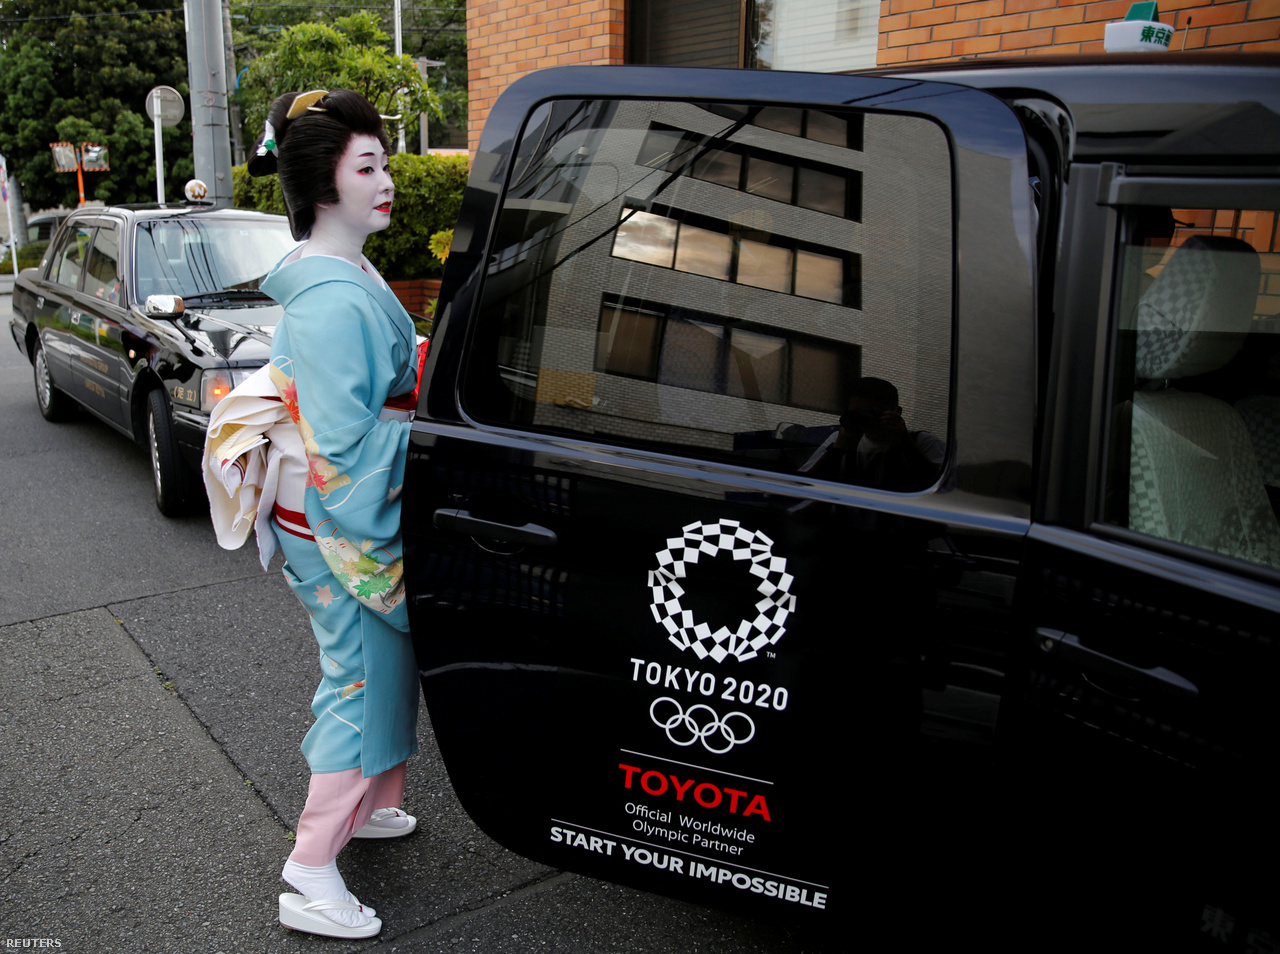 Koyku Geisha sits in a taxi to go to work in Tokyo, June 23, 2020